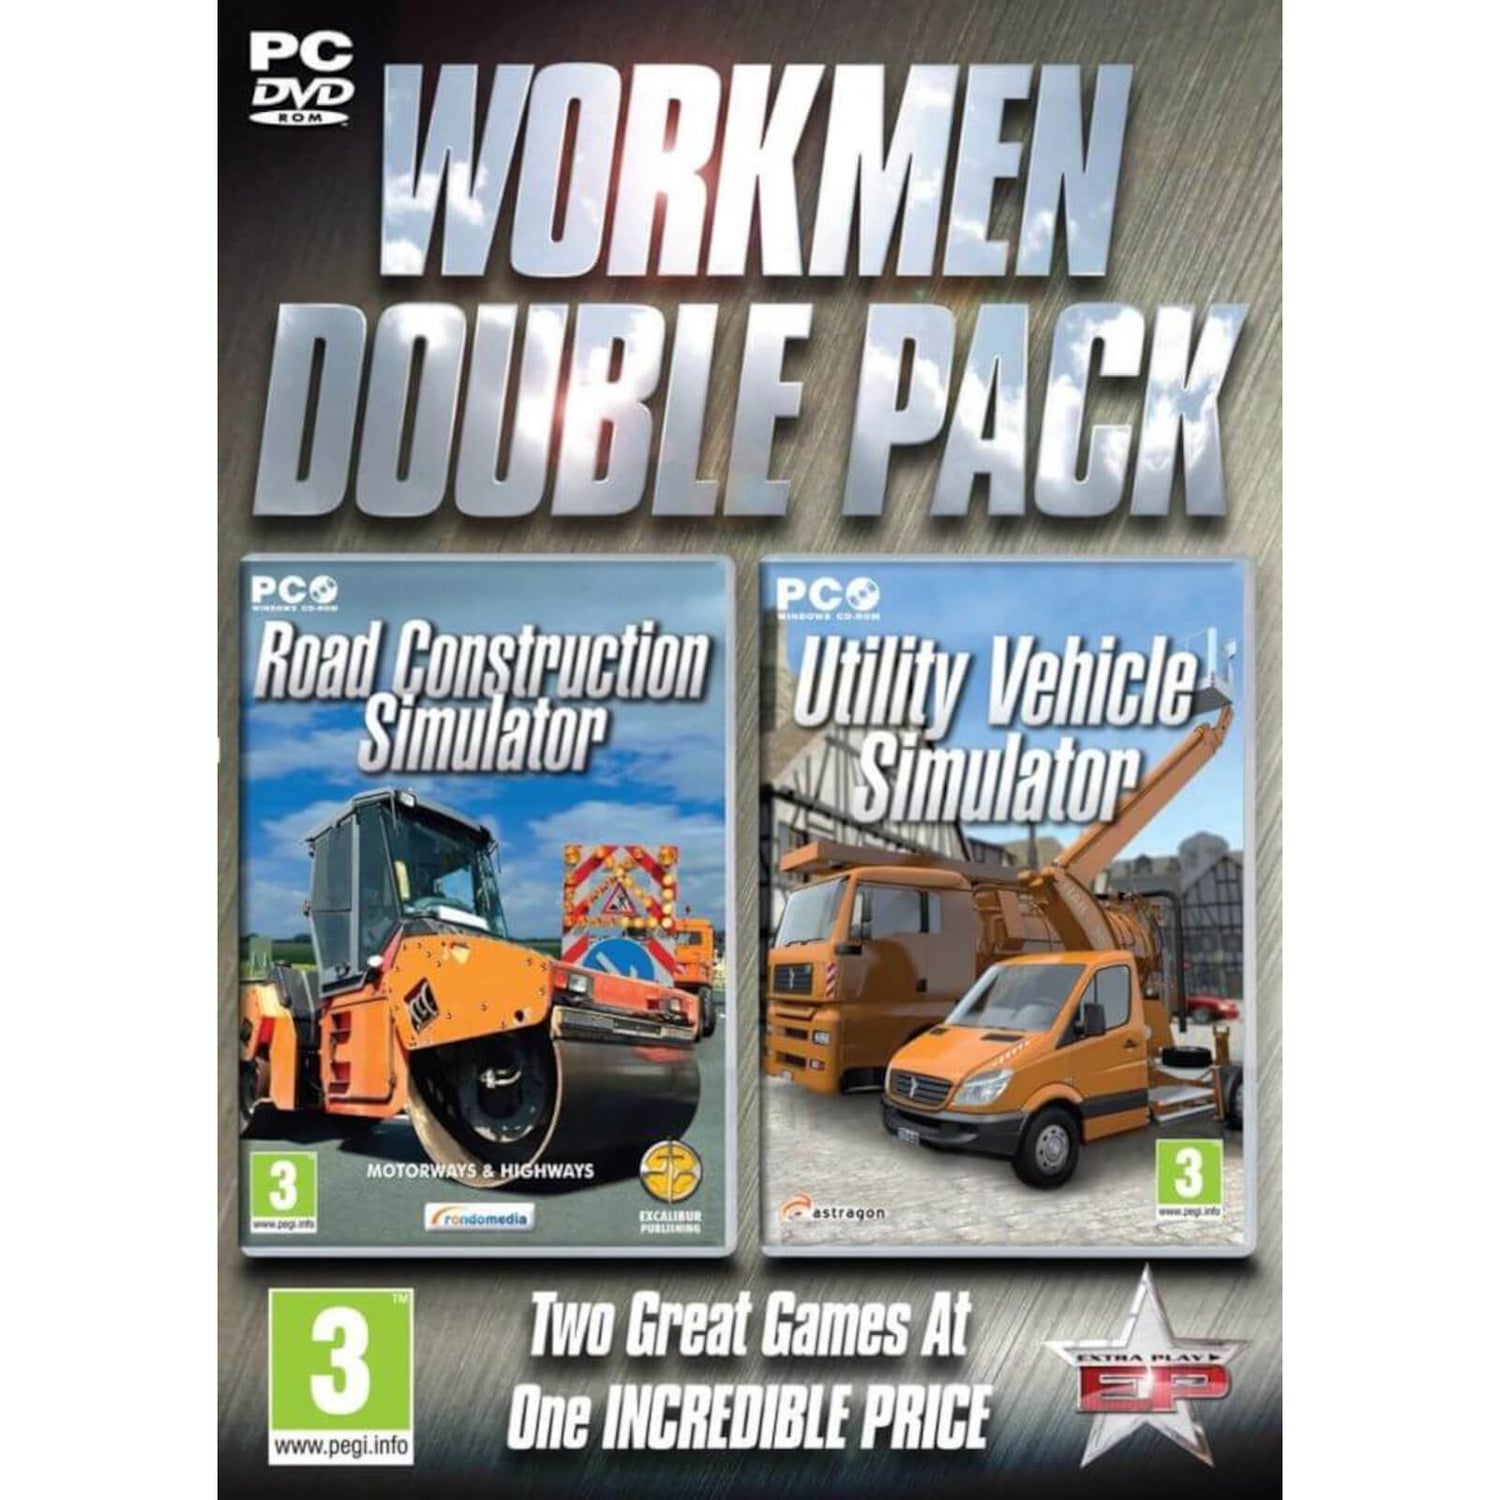 Workman Double Pack - Road Construction & Utility Vehicle Simulator